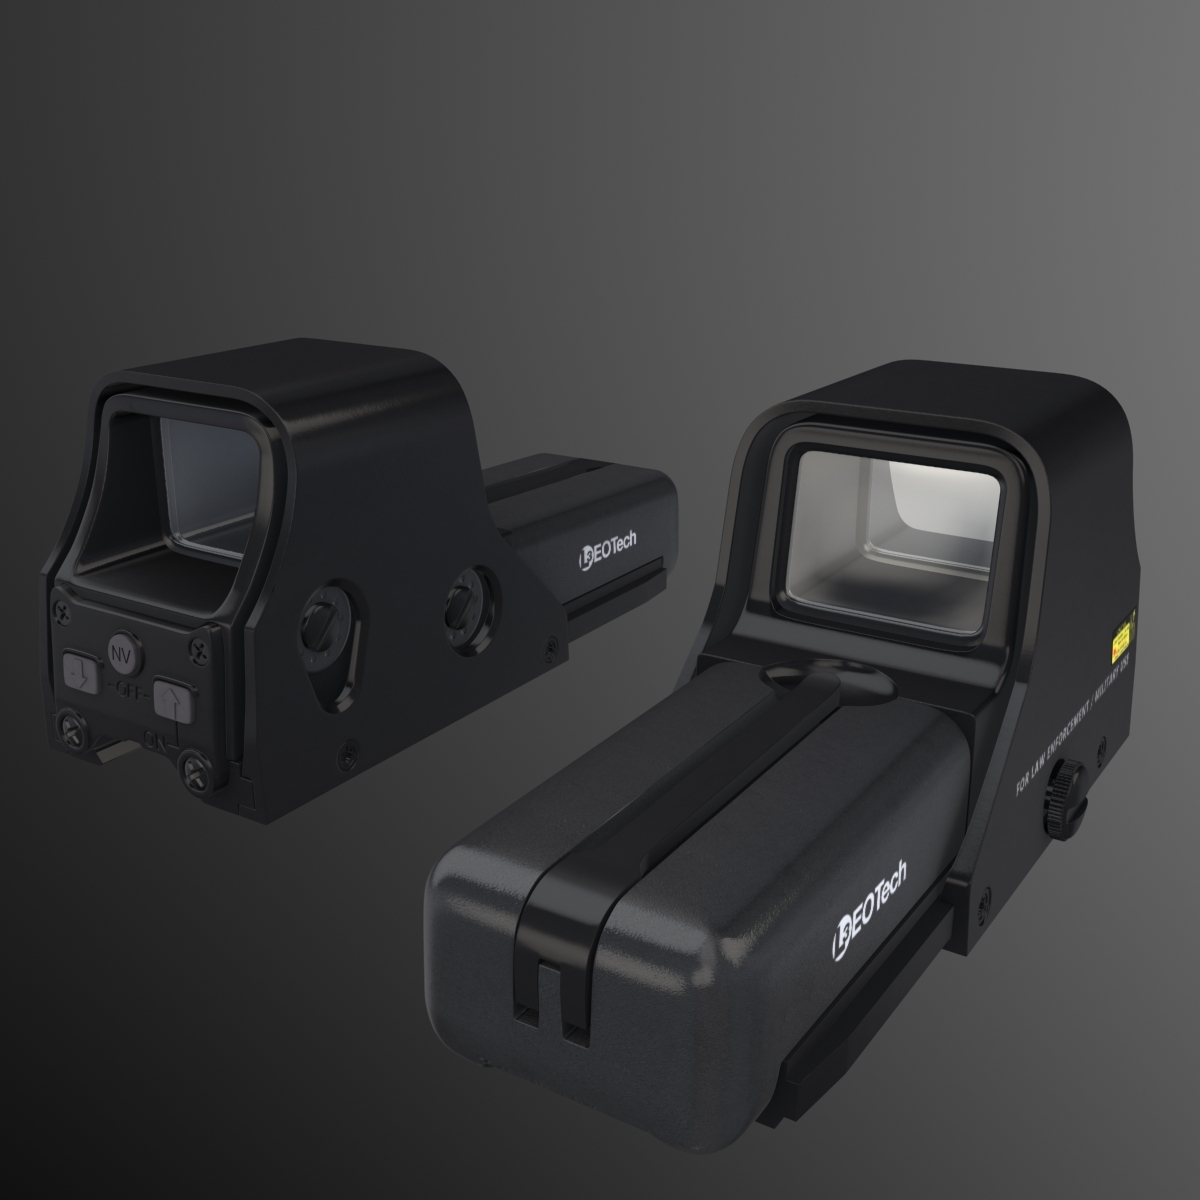 Eotech 552 Holographic Sight